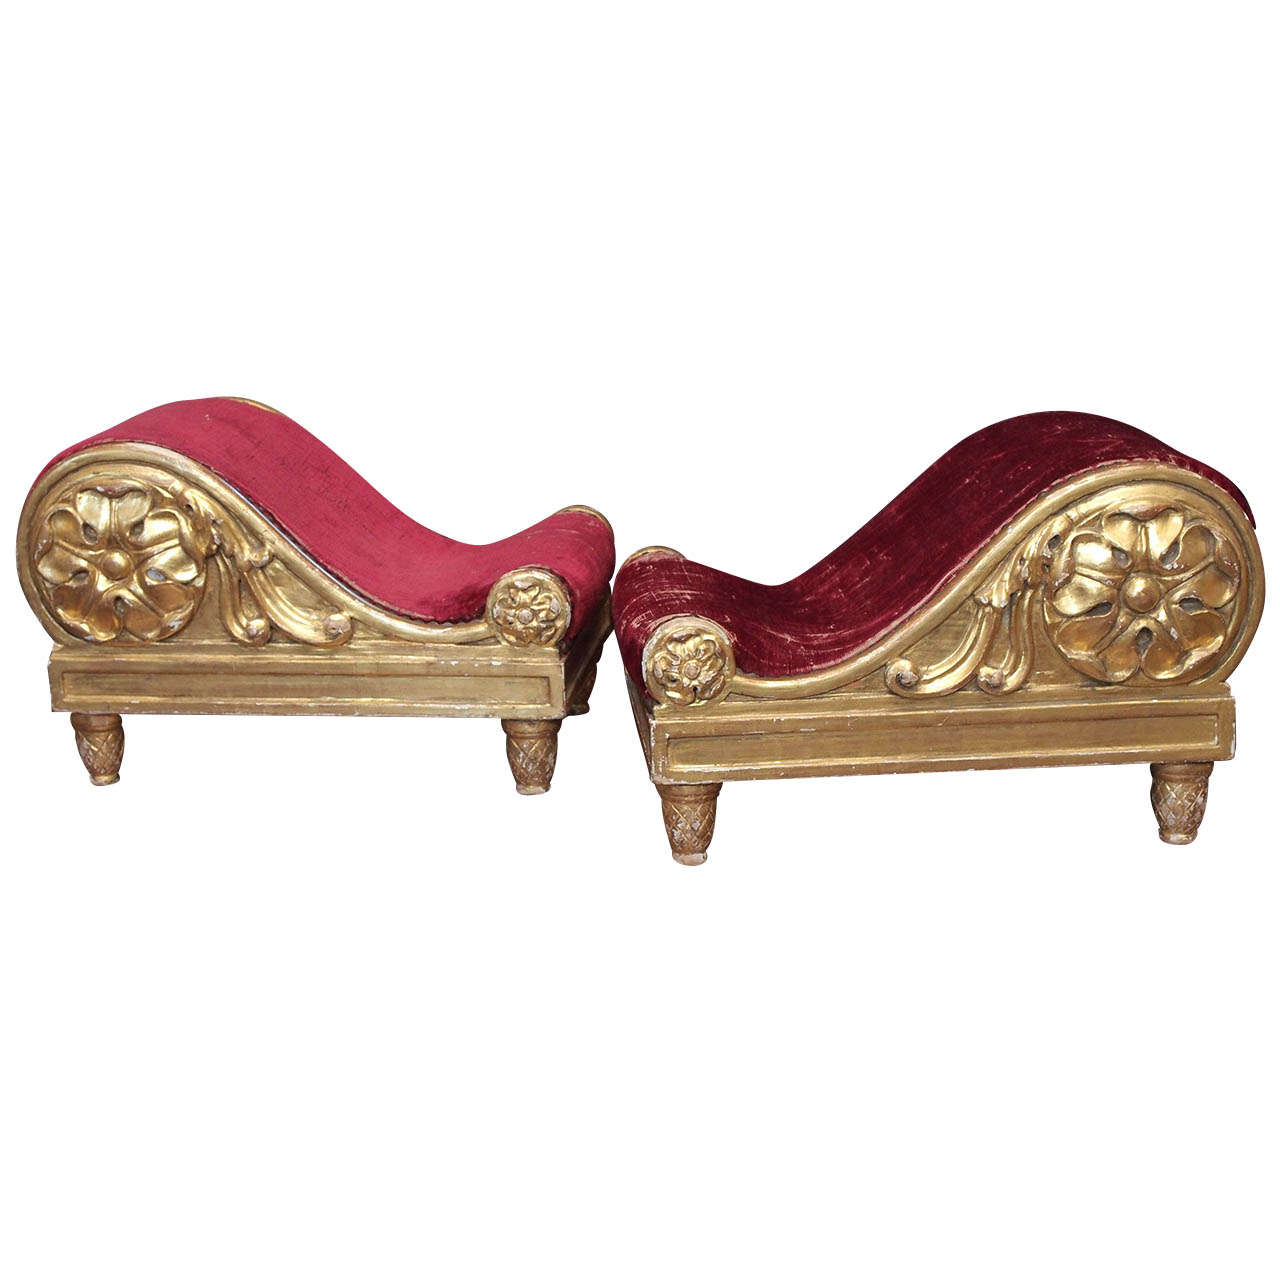 Pair of English Regency 19th Century "Gout" Footstools